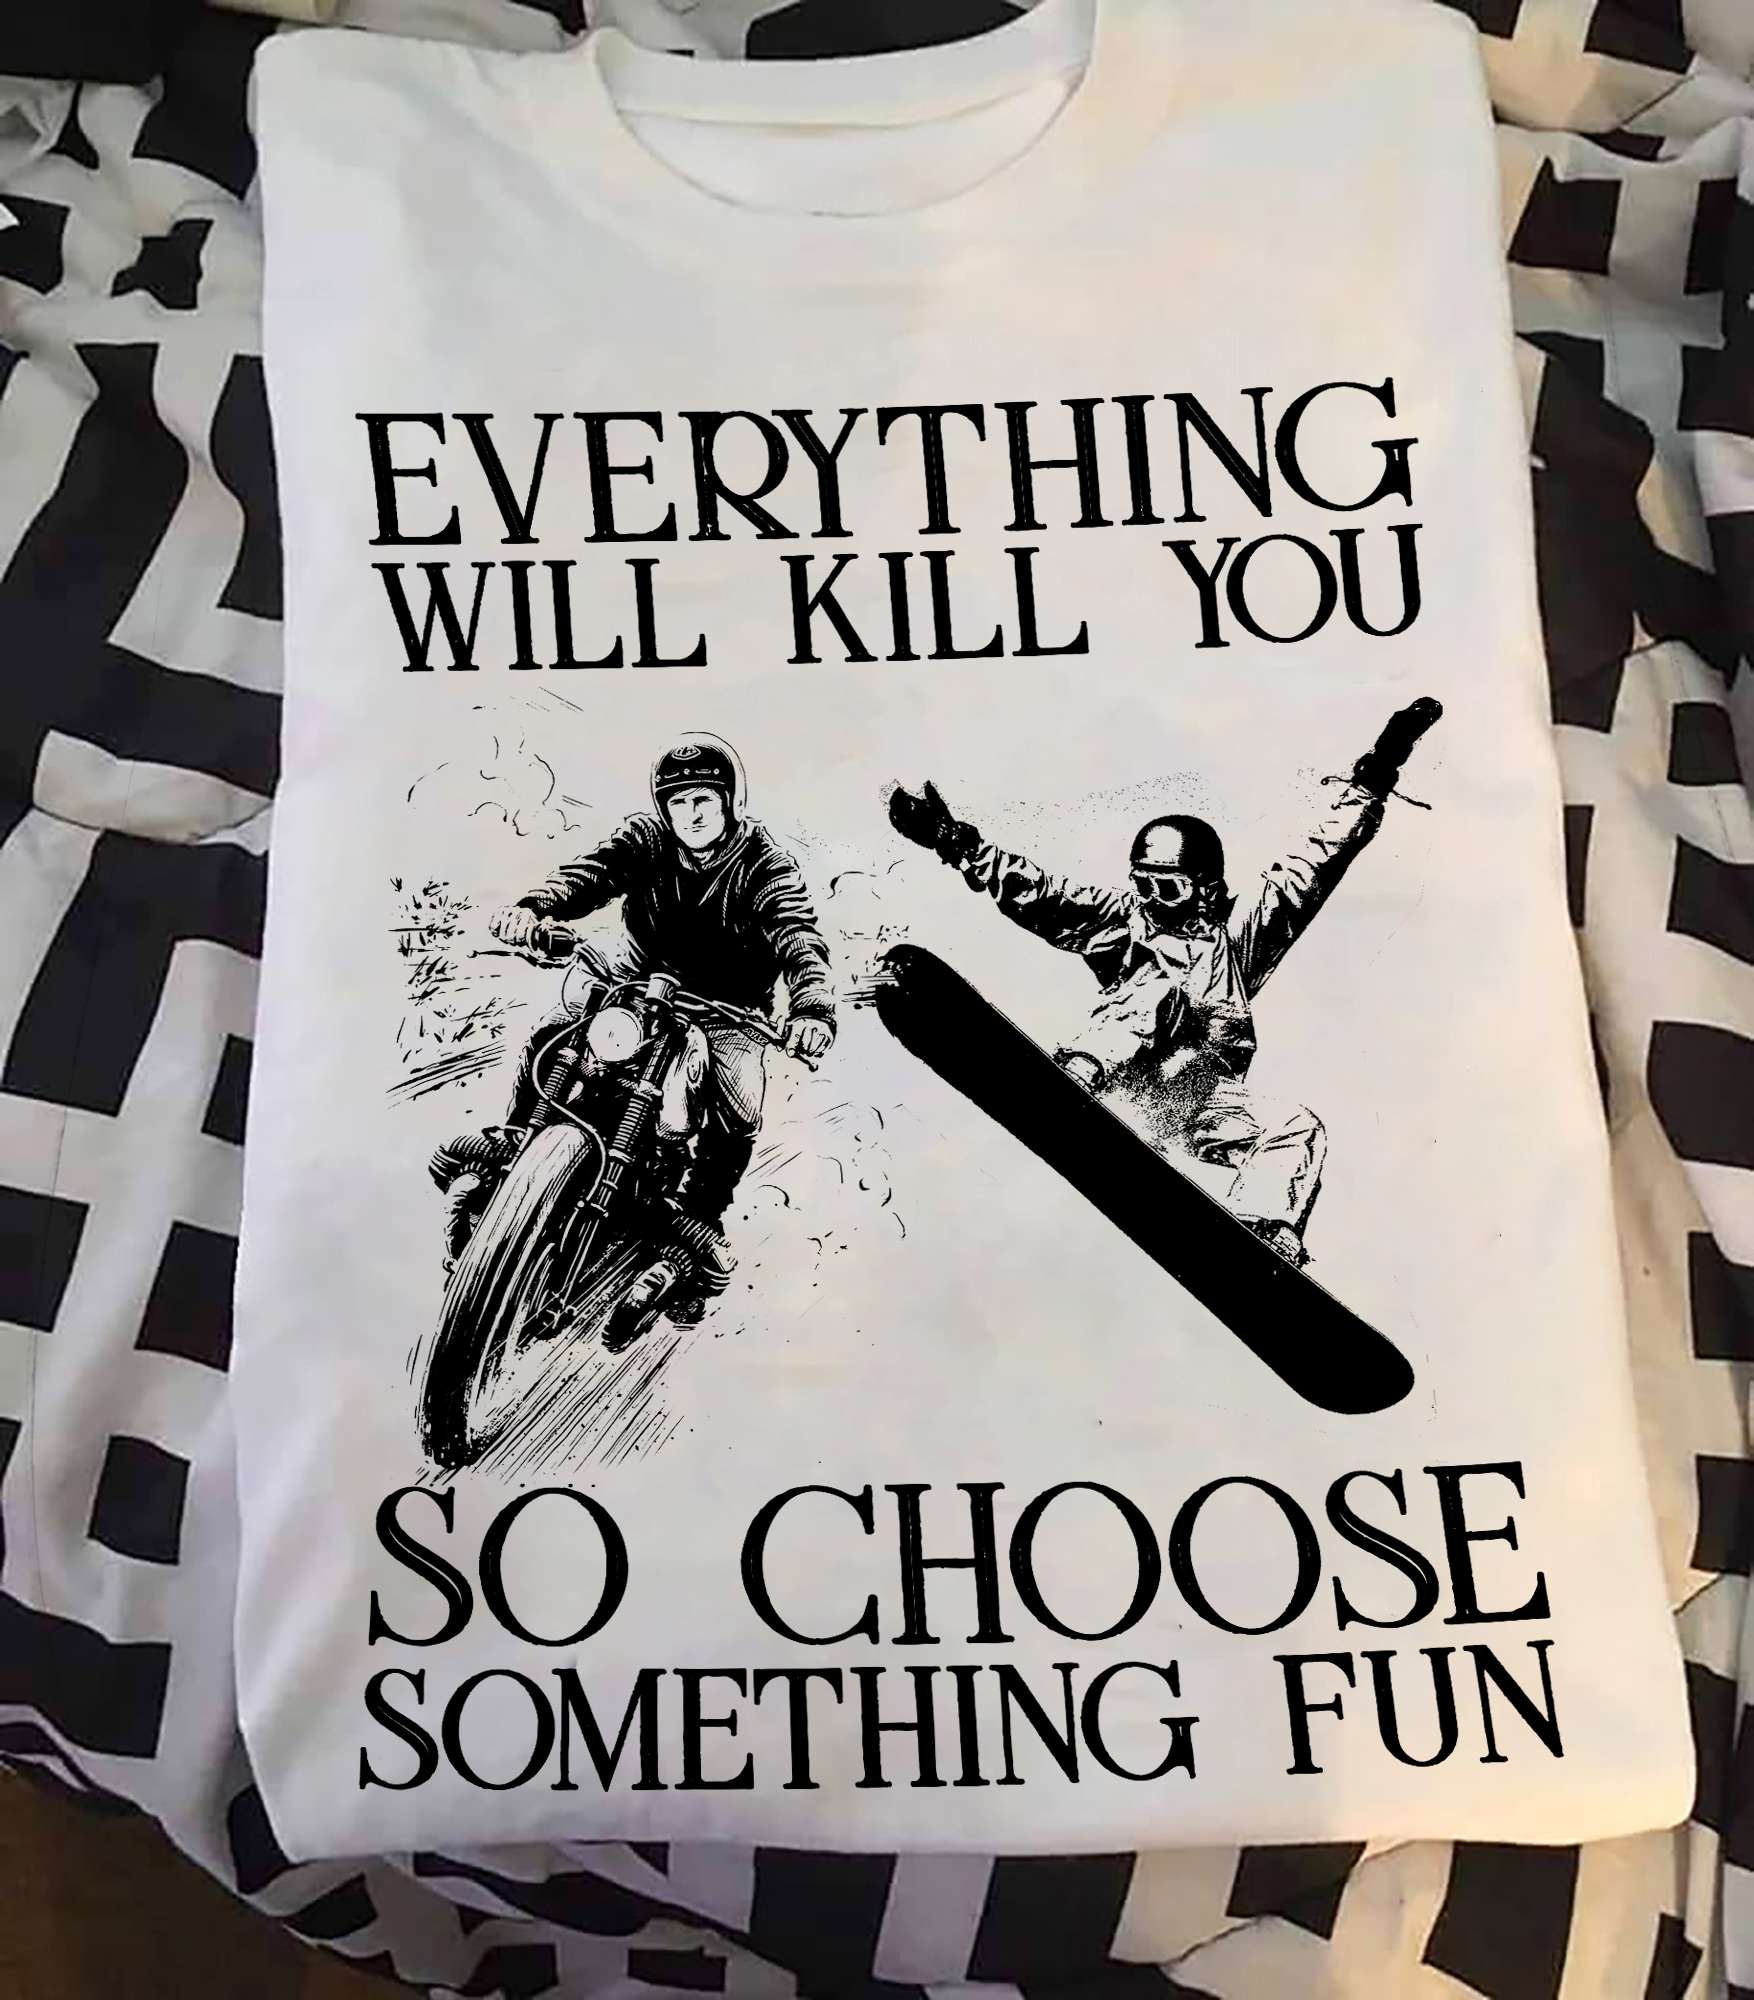 Everything will kill you so choose something fun - Love skiing, motorcycle and skiing